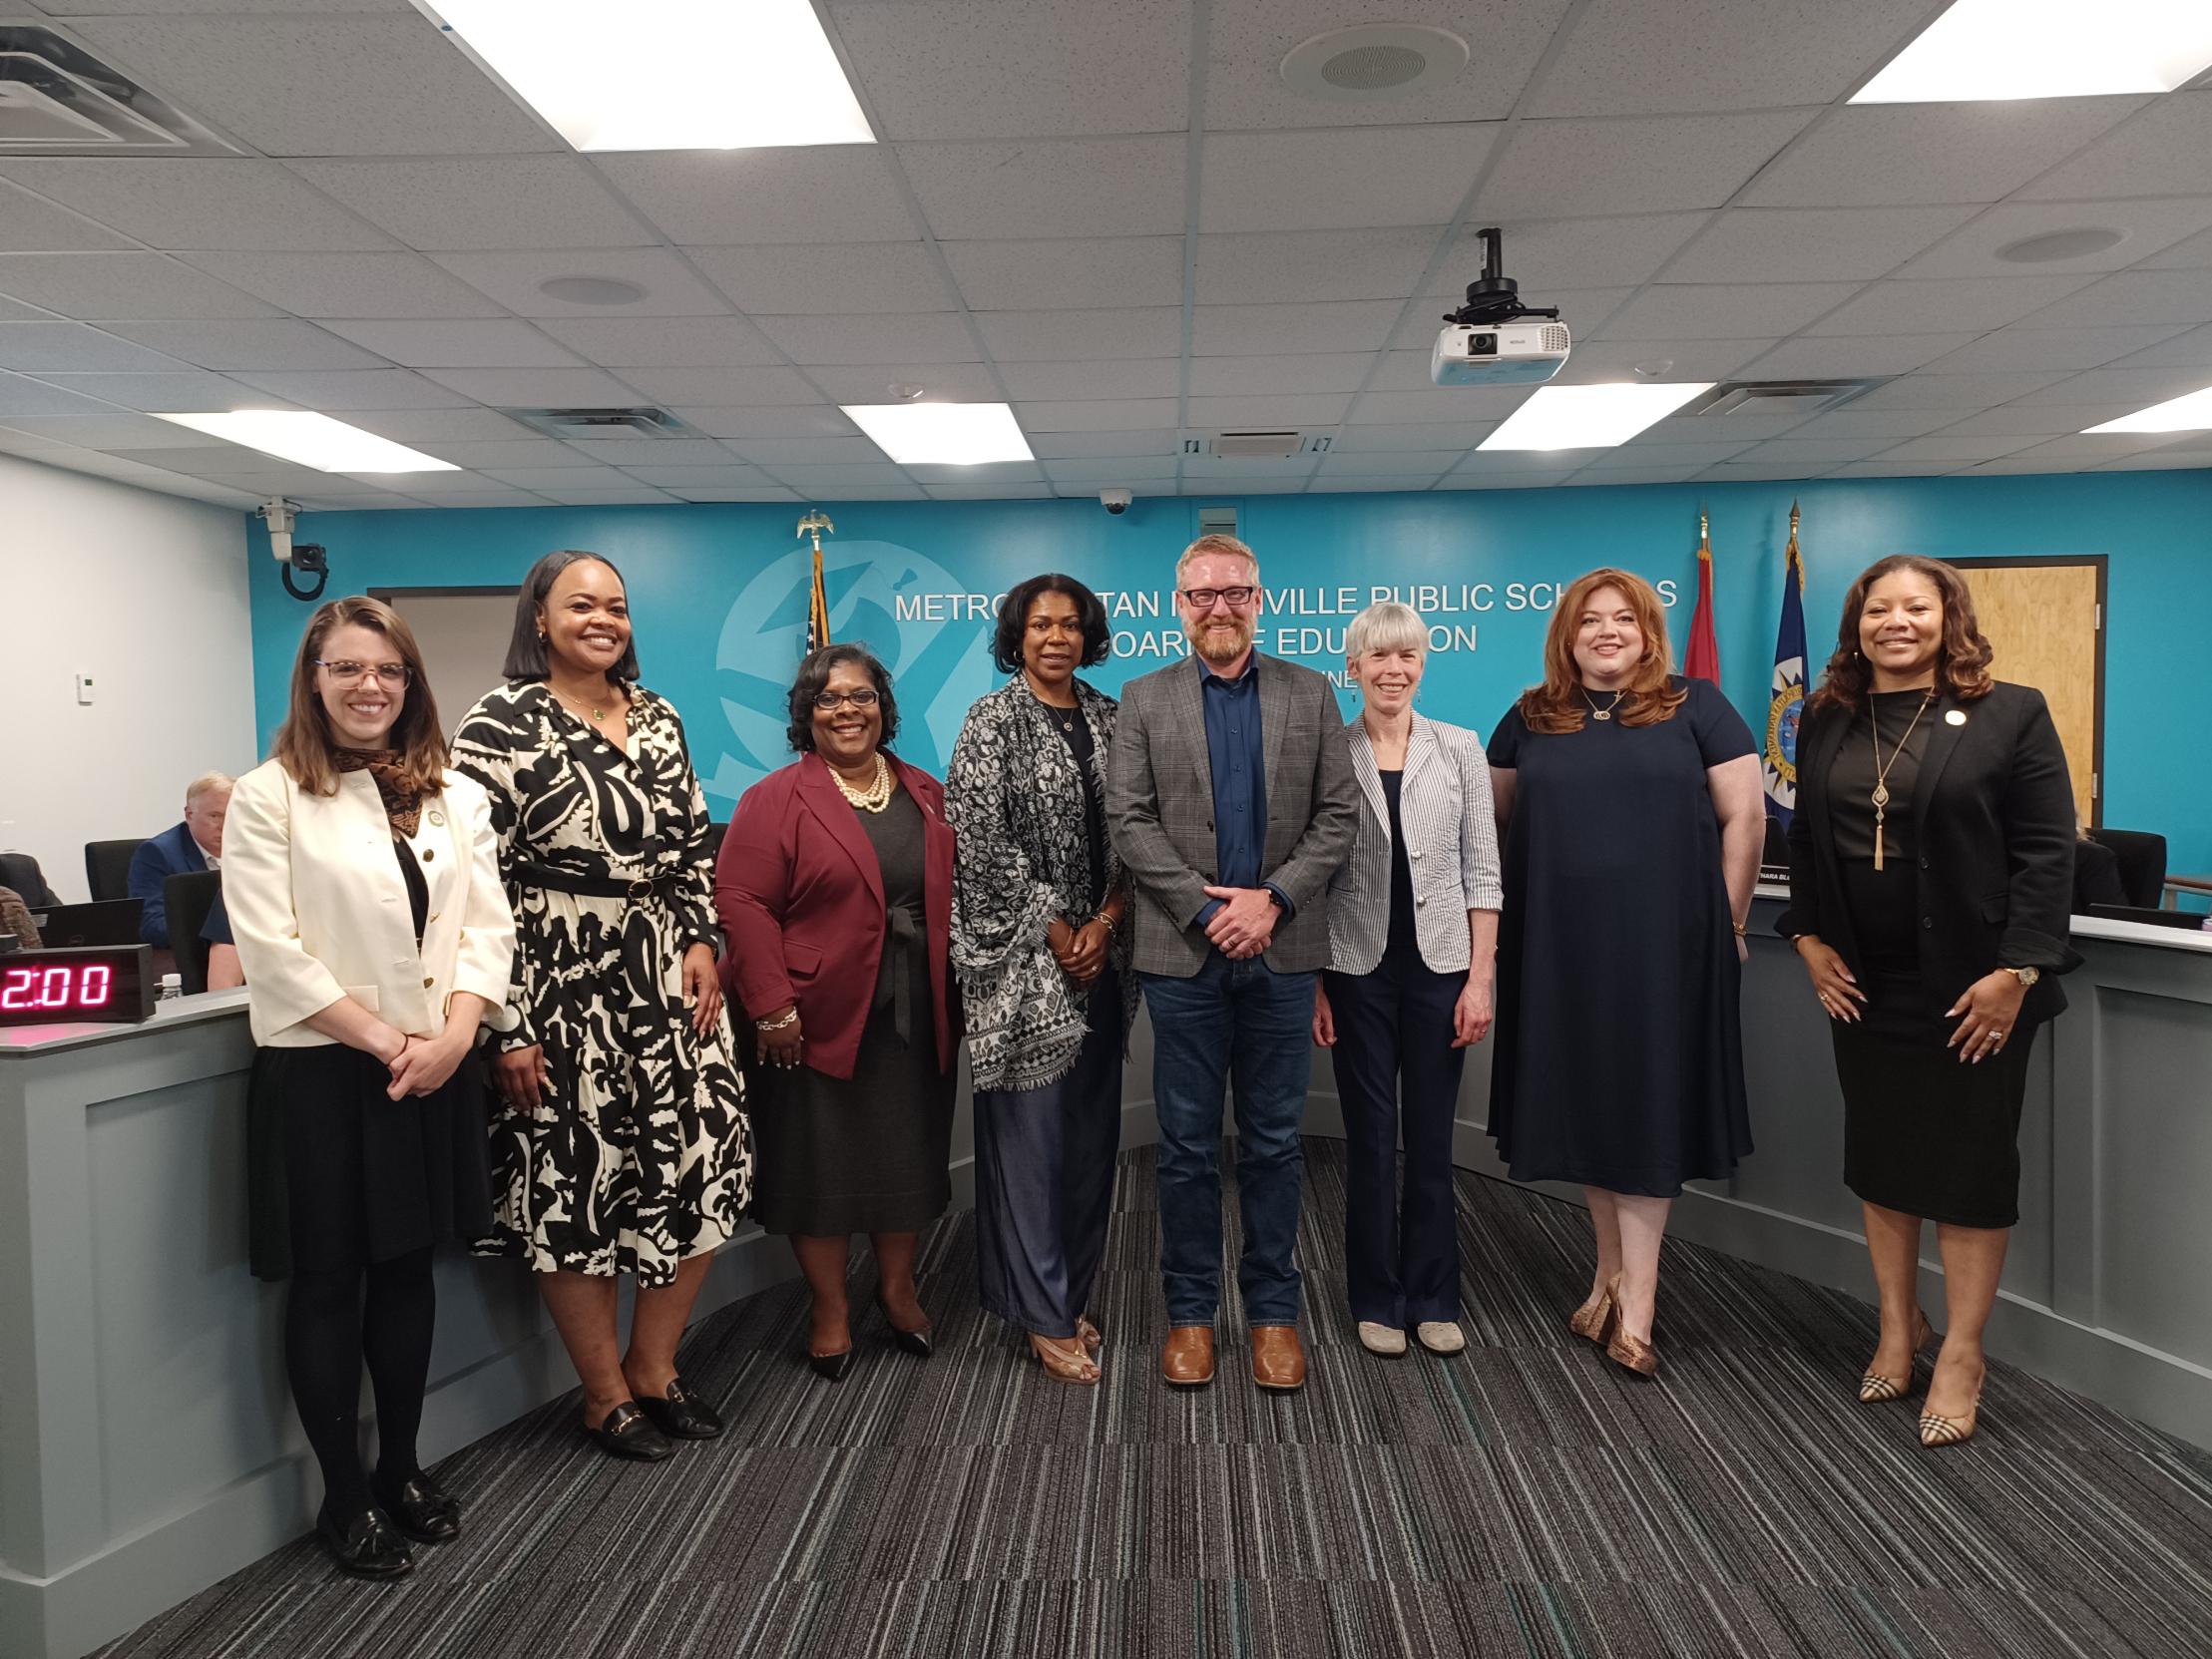 Peabody College faculty members Andrew Hostetler (center) and Marcy Singer-Gabella (center right) with representatives of MNPS, including Director Adrienne Battle (far right), following the school board announcement on April 23.